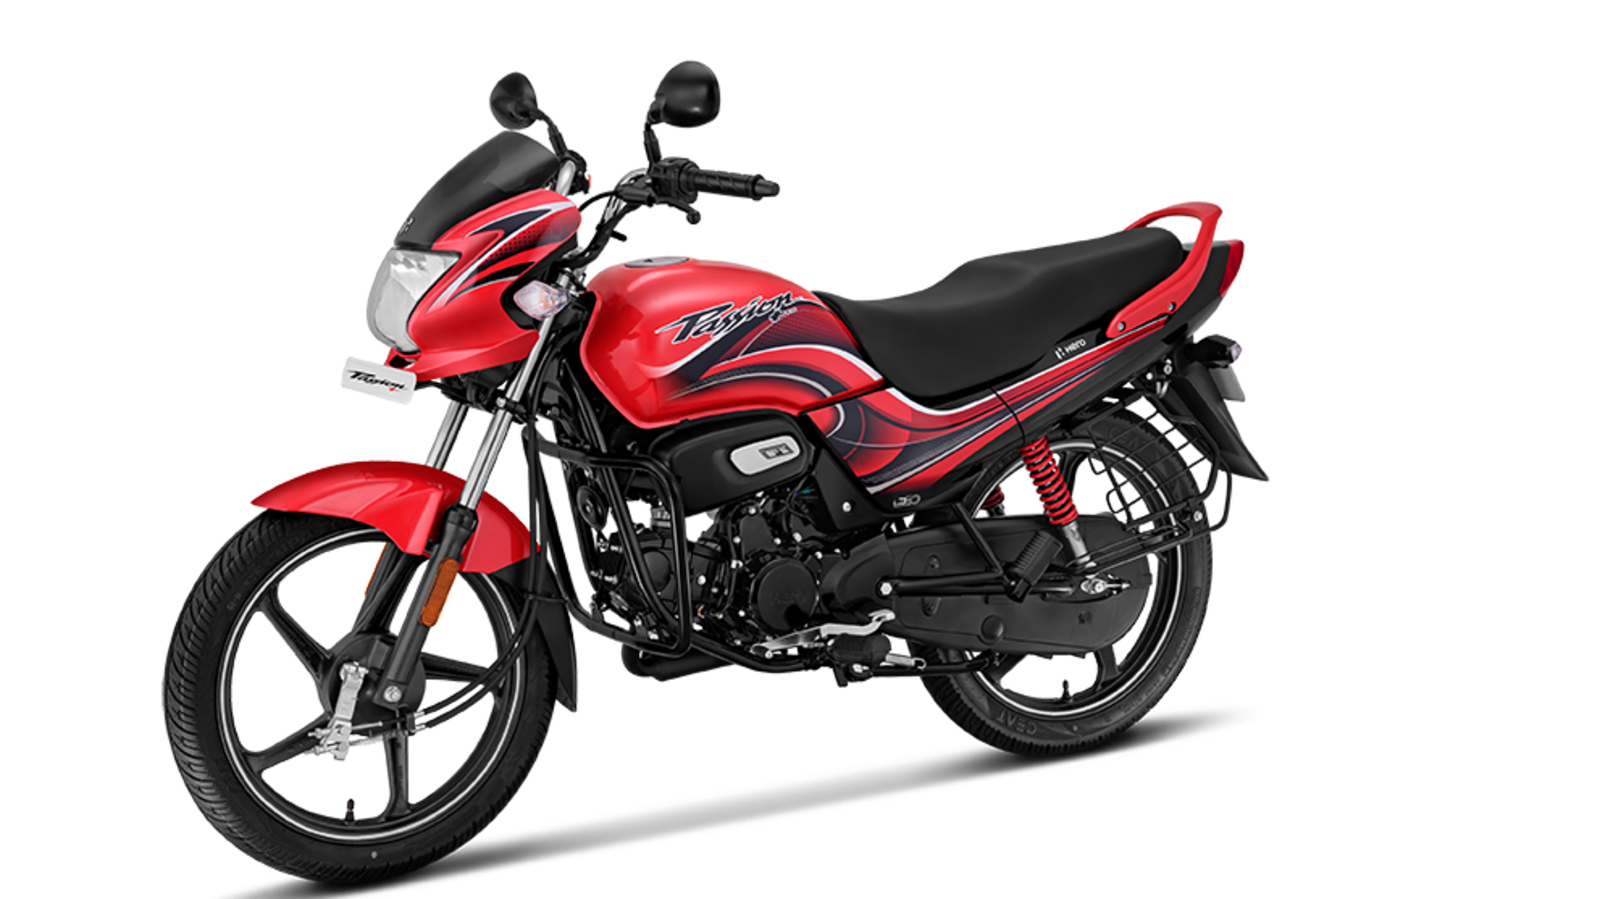 Hero Passion Plus launched at Rs 76,301, gets new features Bergip Cars